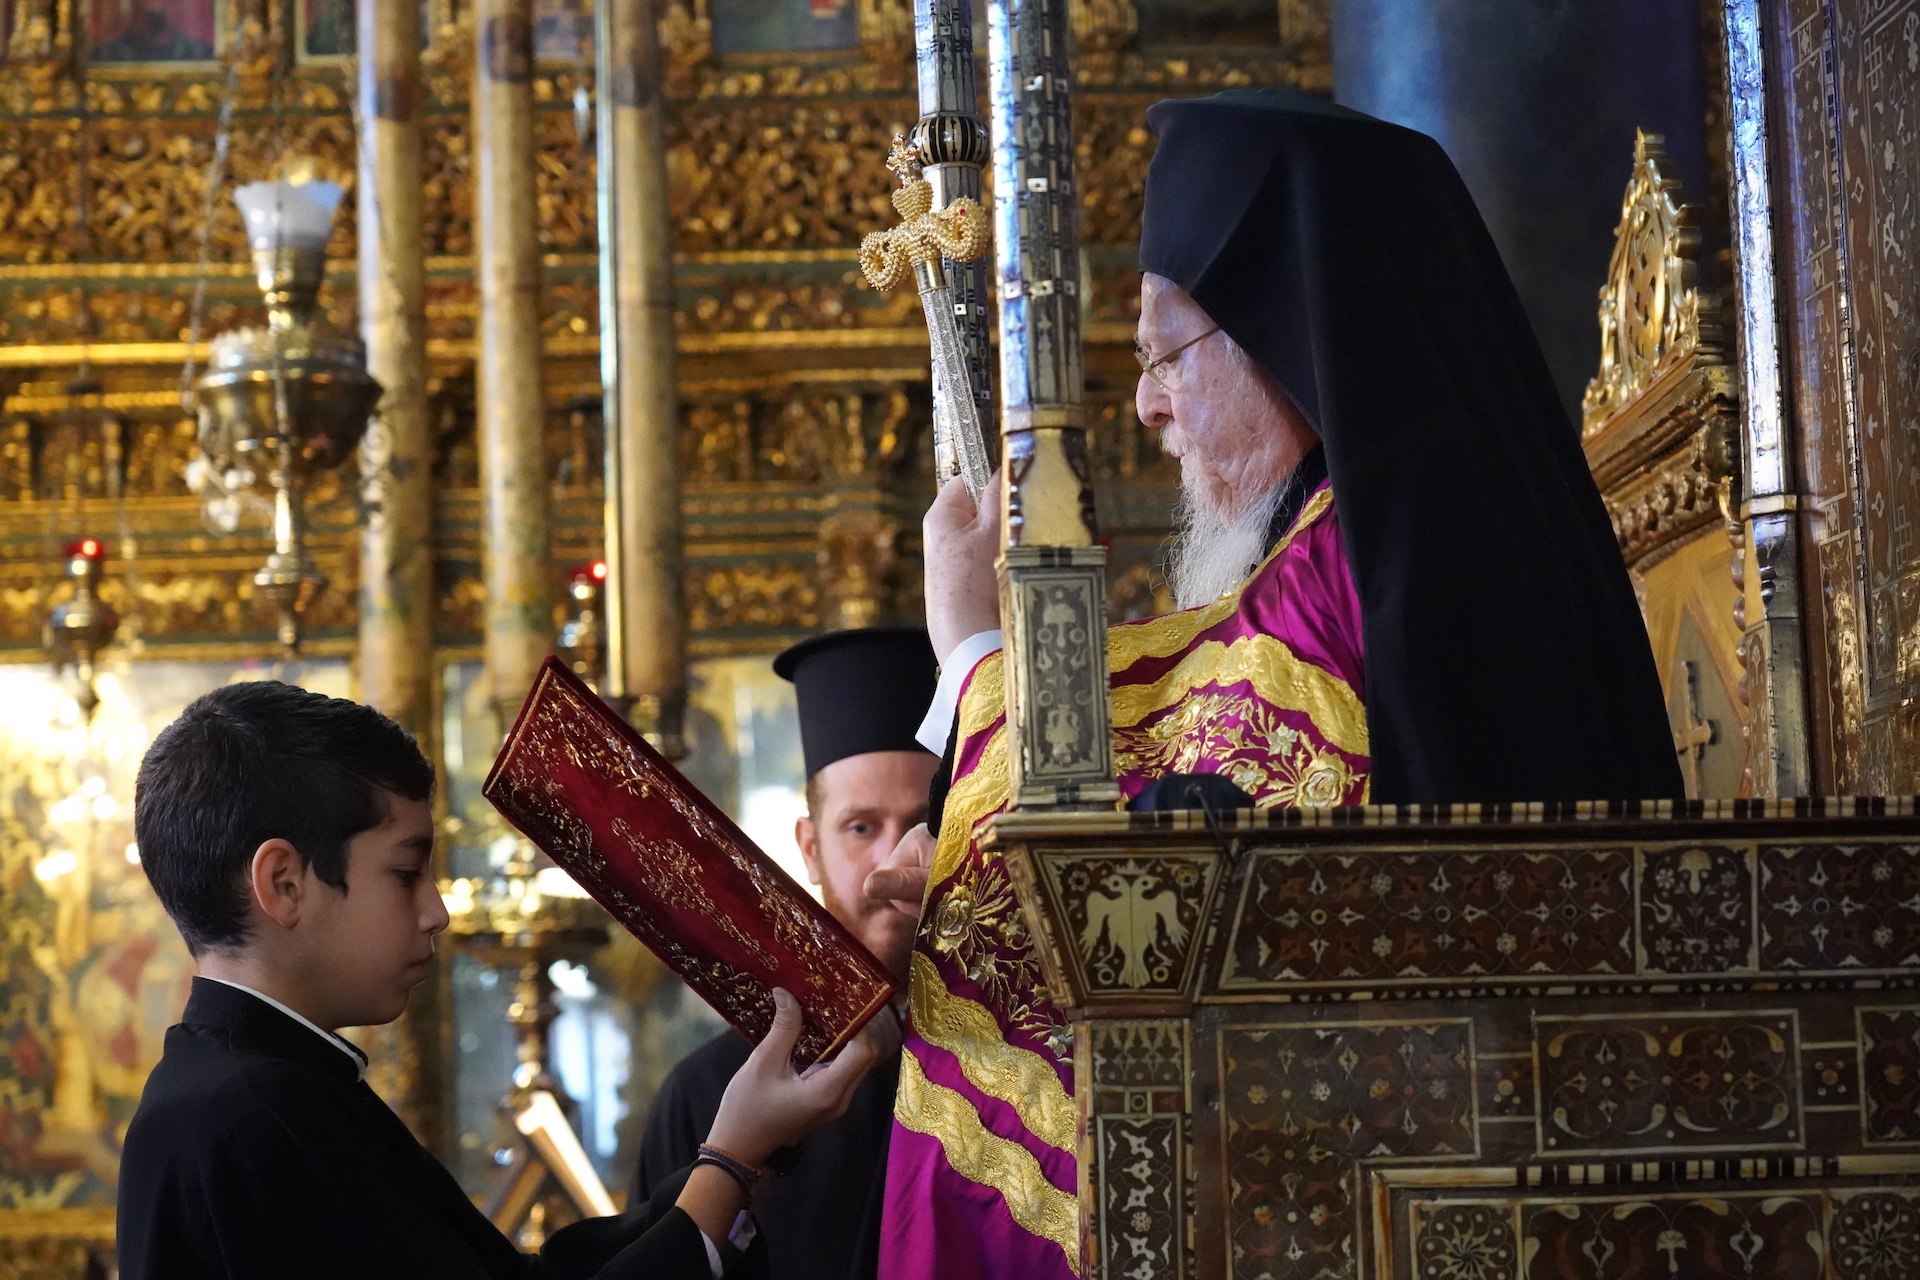 Ecumenical Patriarch Bartholomew to the Youth: “Resist the instrumentalisation of the human person”